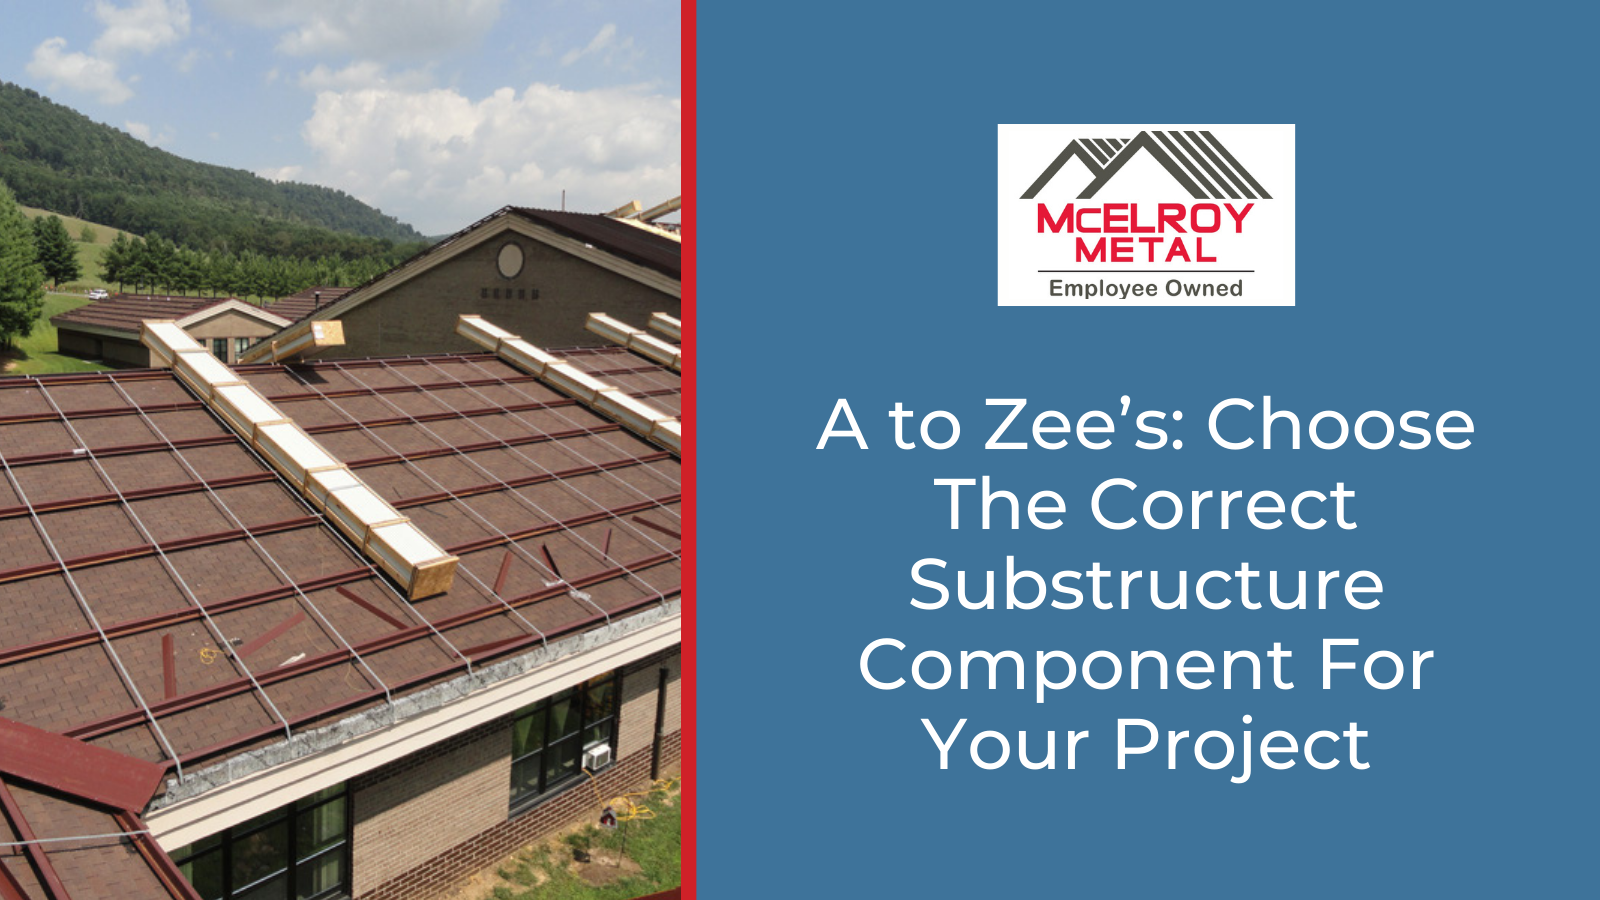 A to Zee’s: Choose The Correct Substructure Component For Your Project